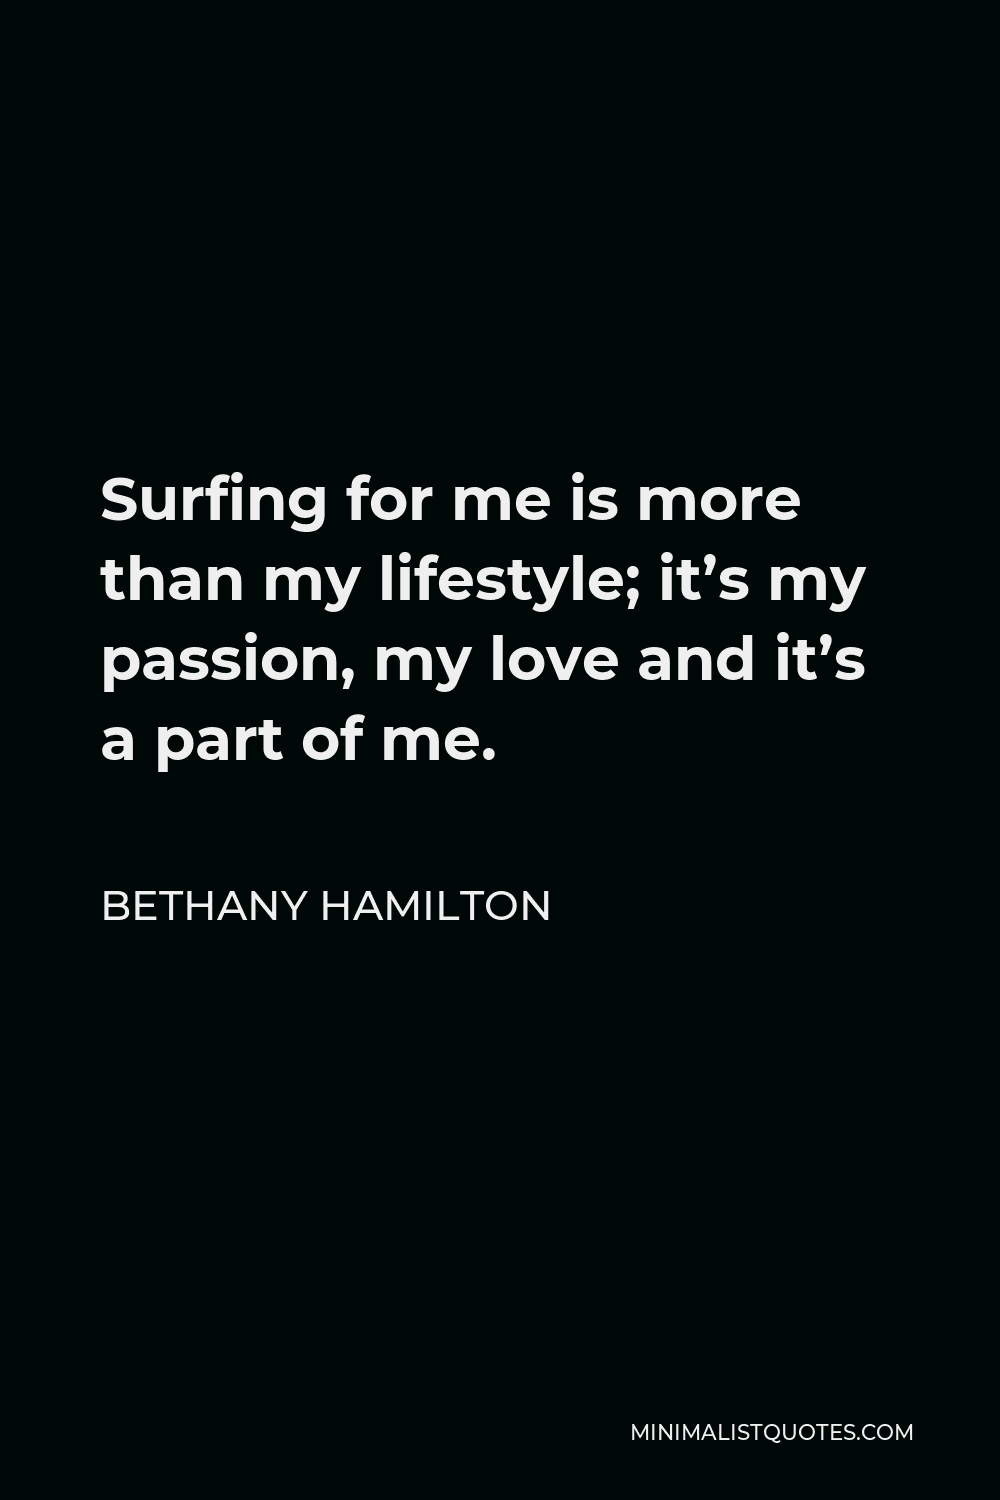 Bethany Hamilton Quote - Surfing for me is more than my lifestyle; it’s my passion, my love and it’s a part of me.